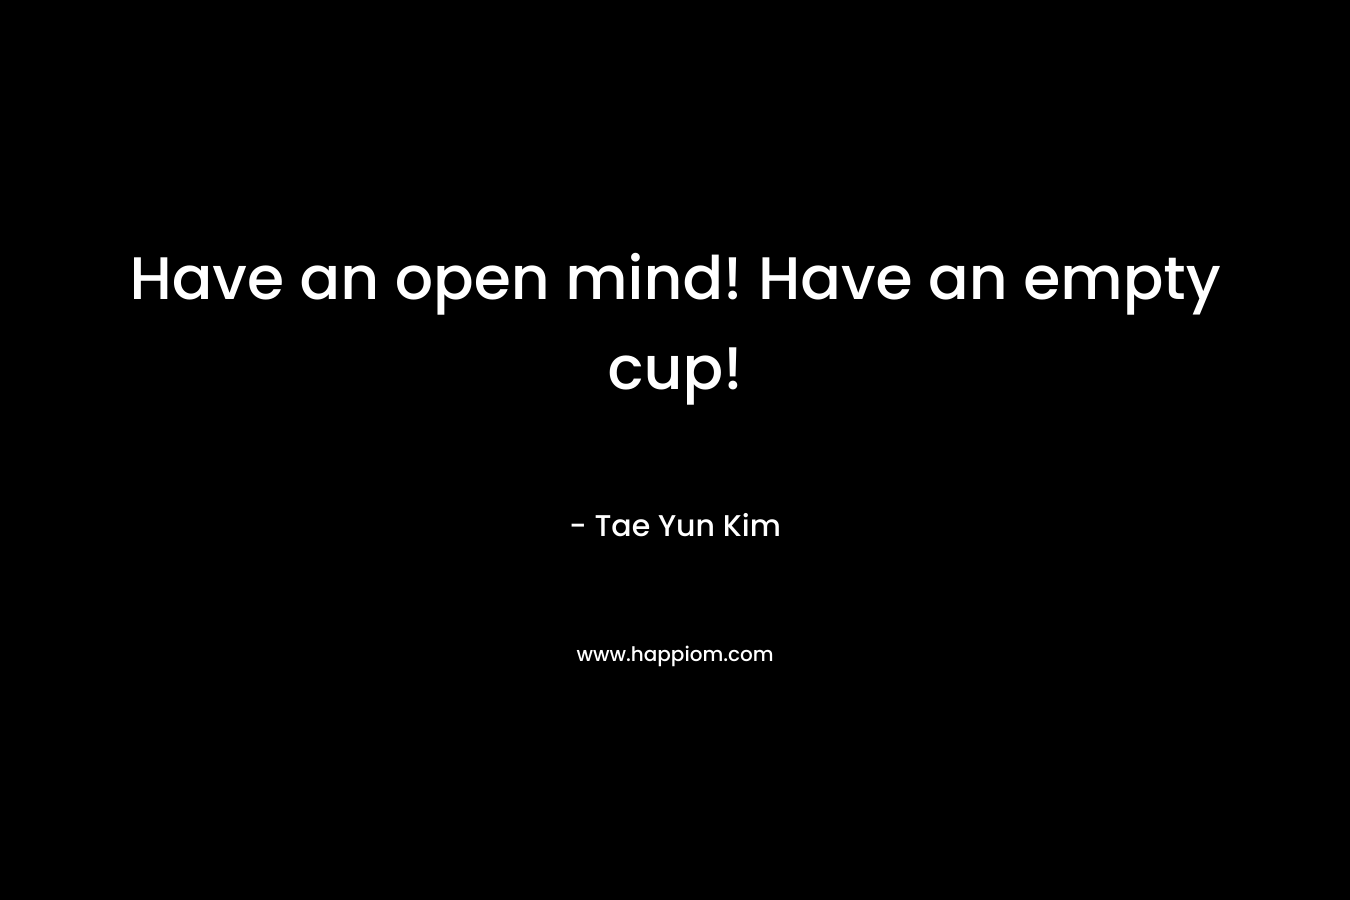 Have an open mind! Have an empty cup!